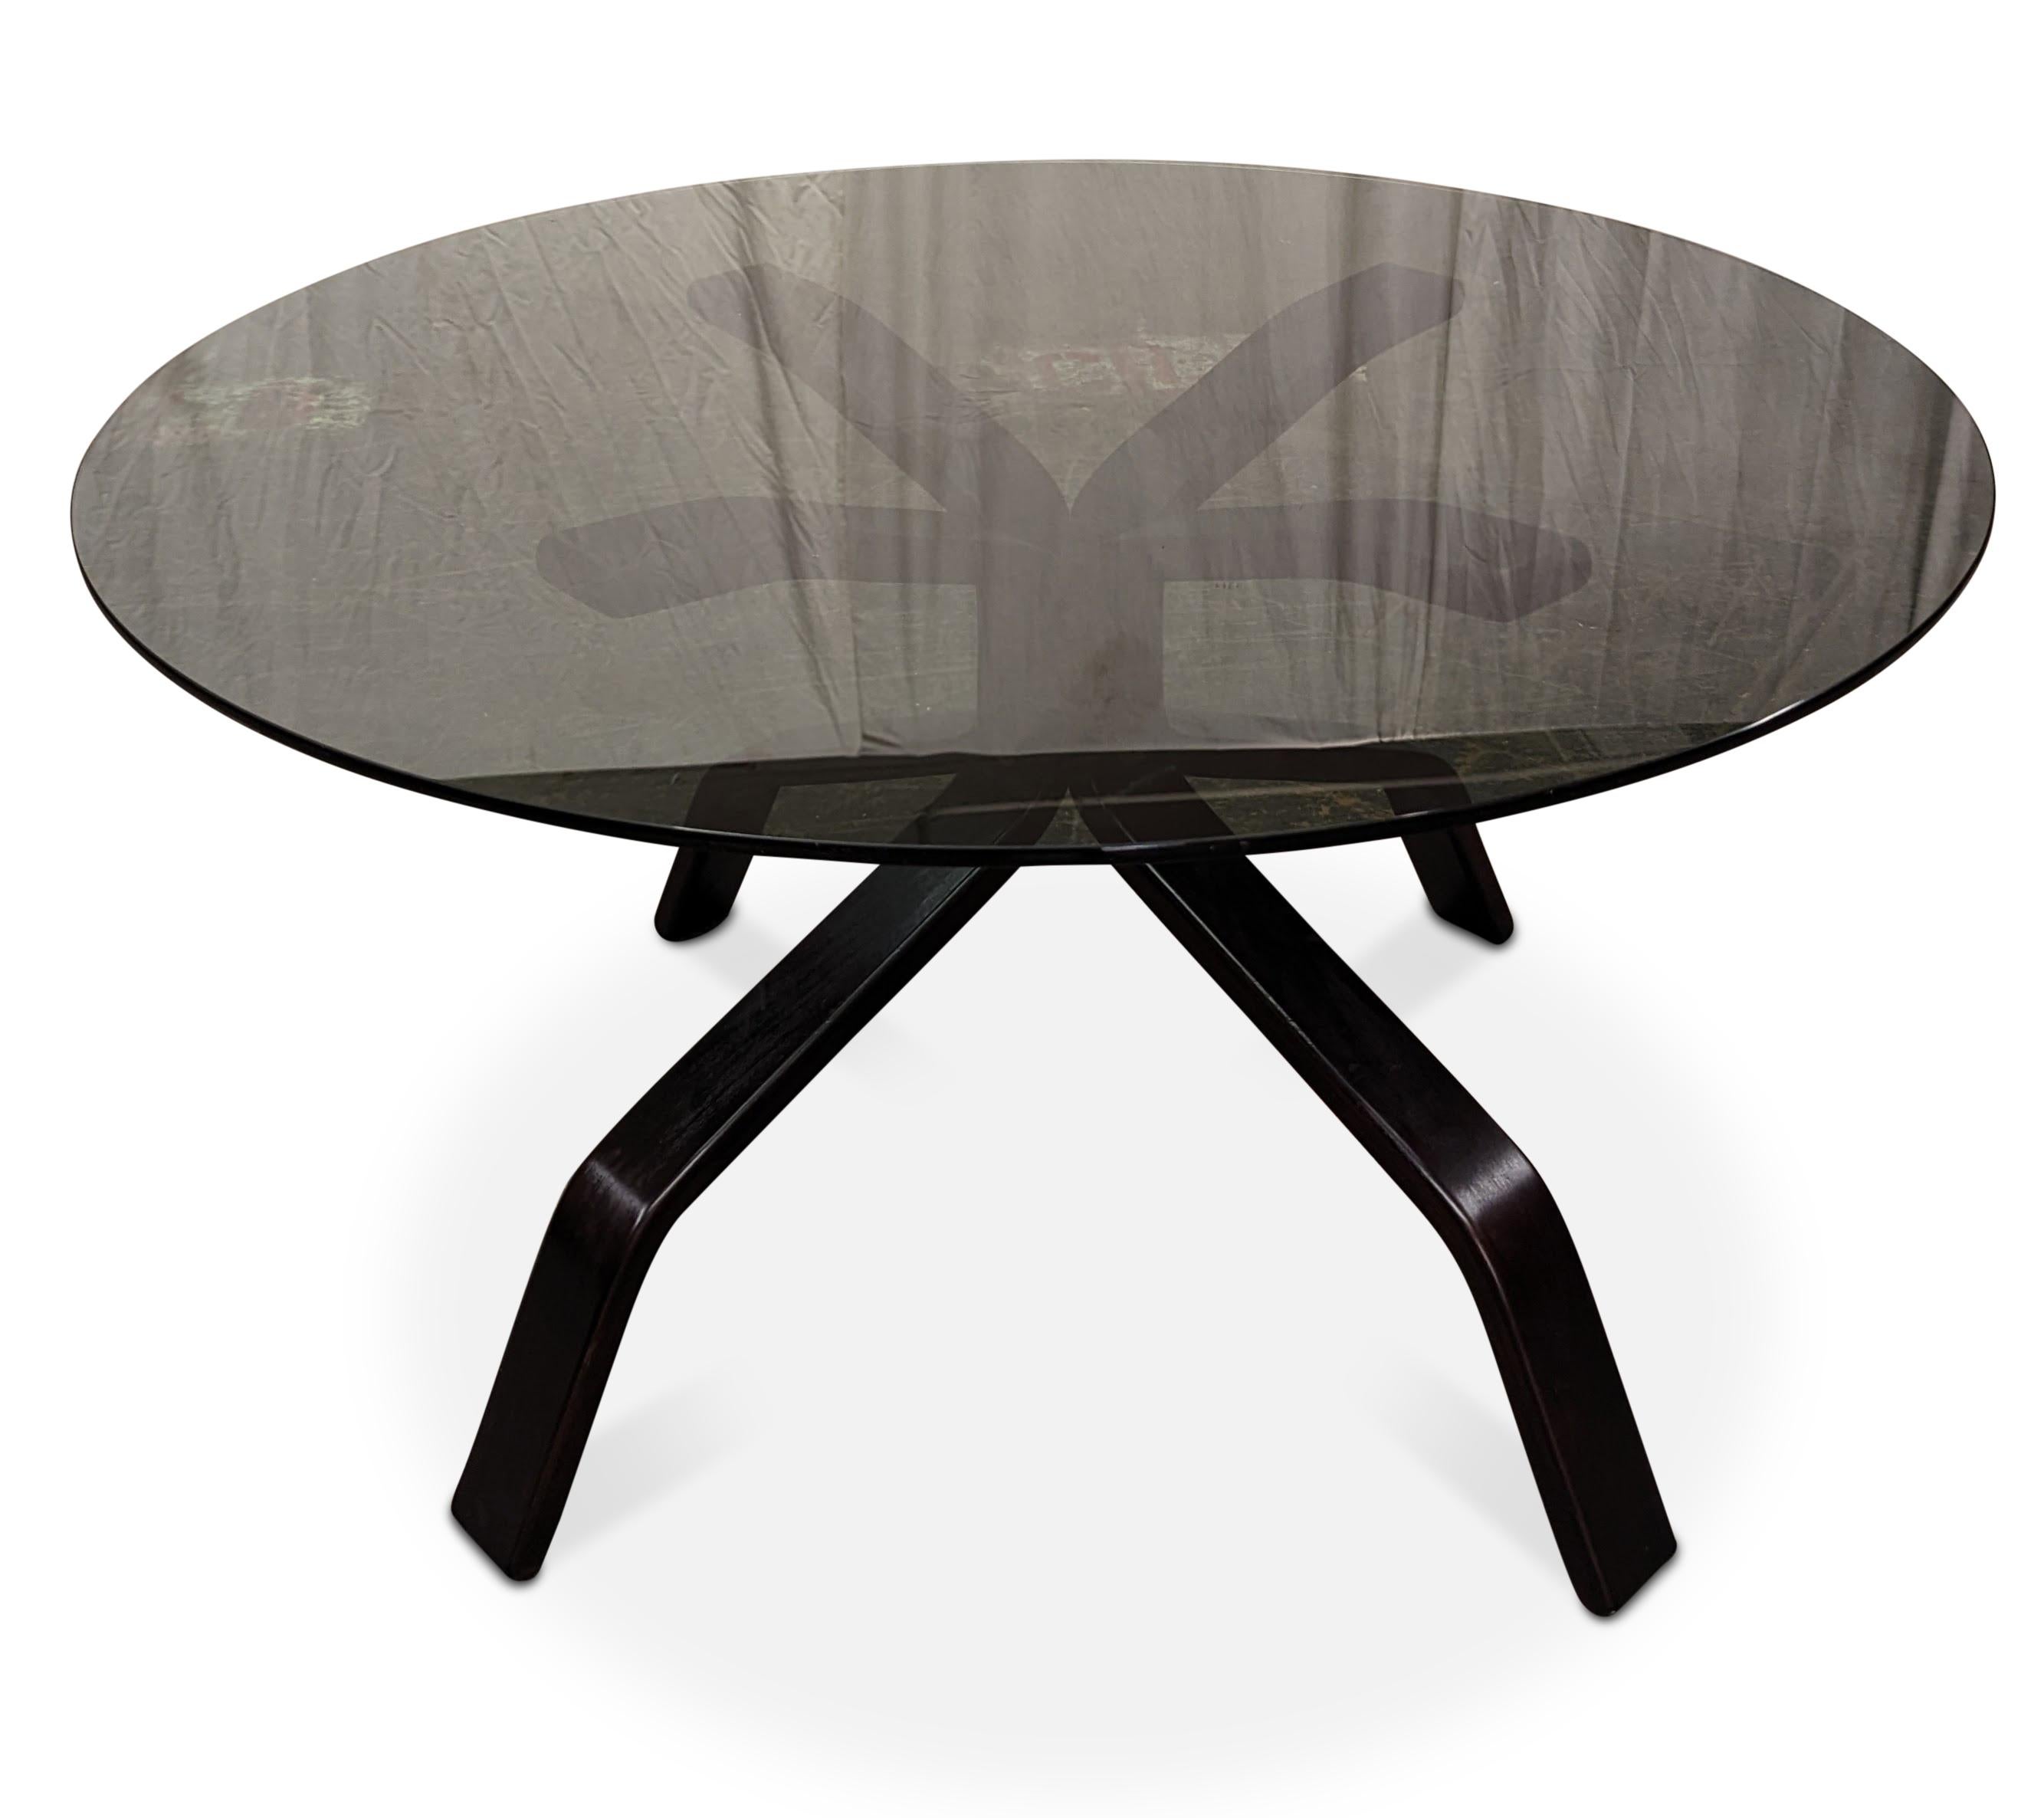 Mid-Century Modern Vintage Danish Mid Century Glass Top Coffee Table - 082339 For Sale